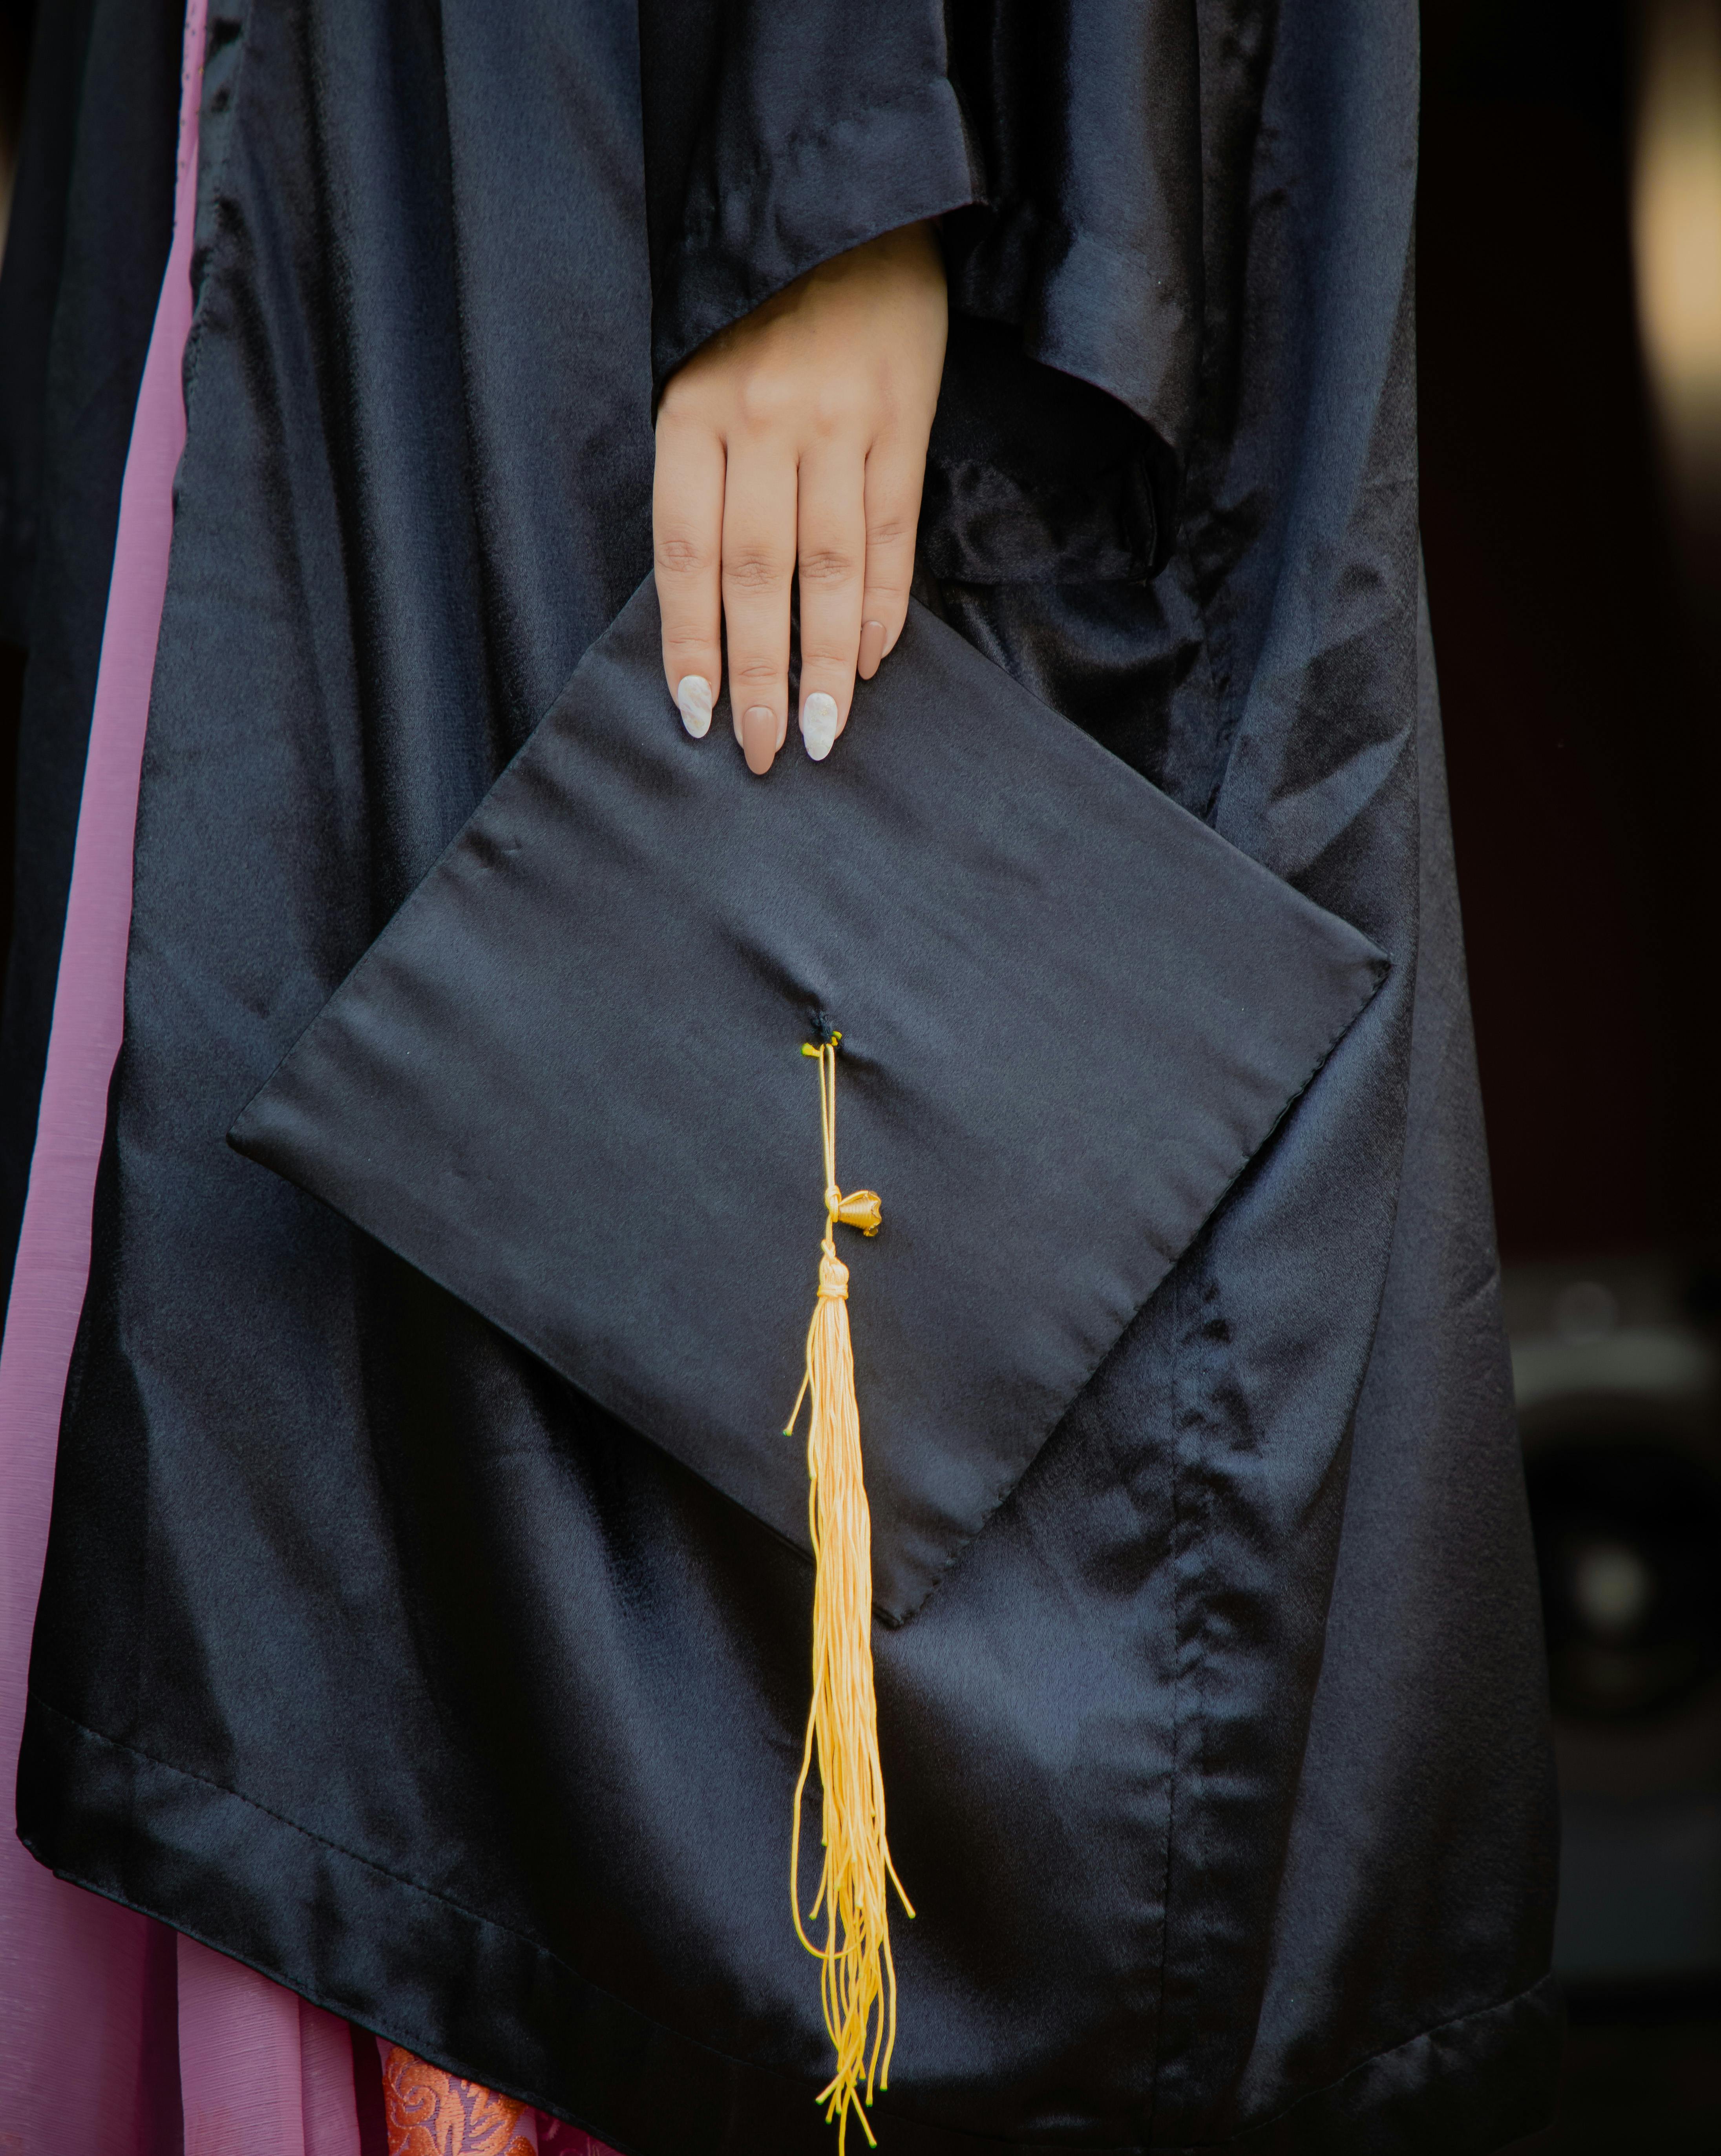 Free Photos - A Young Man Wearing A Cap And Gown, Symbolizing His Graduation  From An Academic Program. He Appears To Be Looking Up, Possibly In  Reflection Or Anticipation Of The Future. |